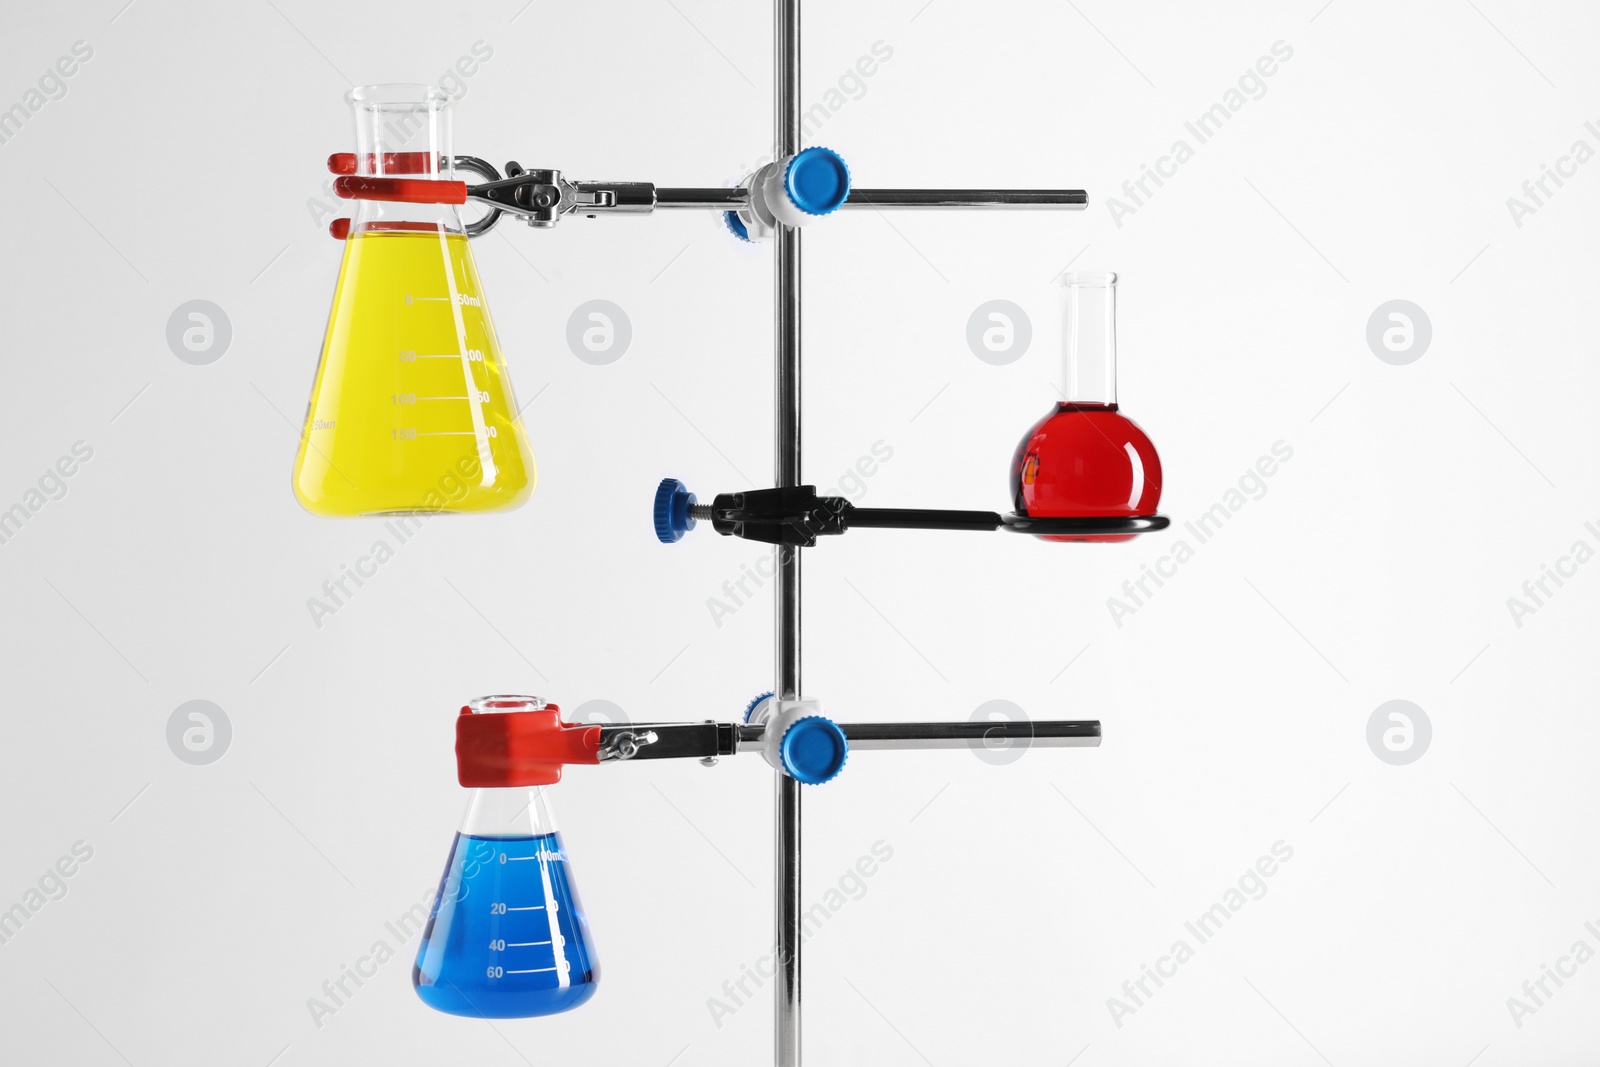 Photo of Retort stand and laboratory flasks with liquids on white background